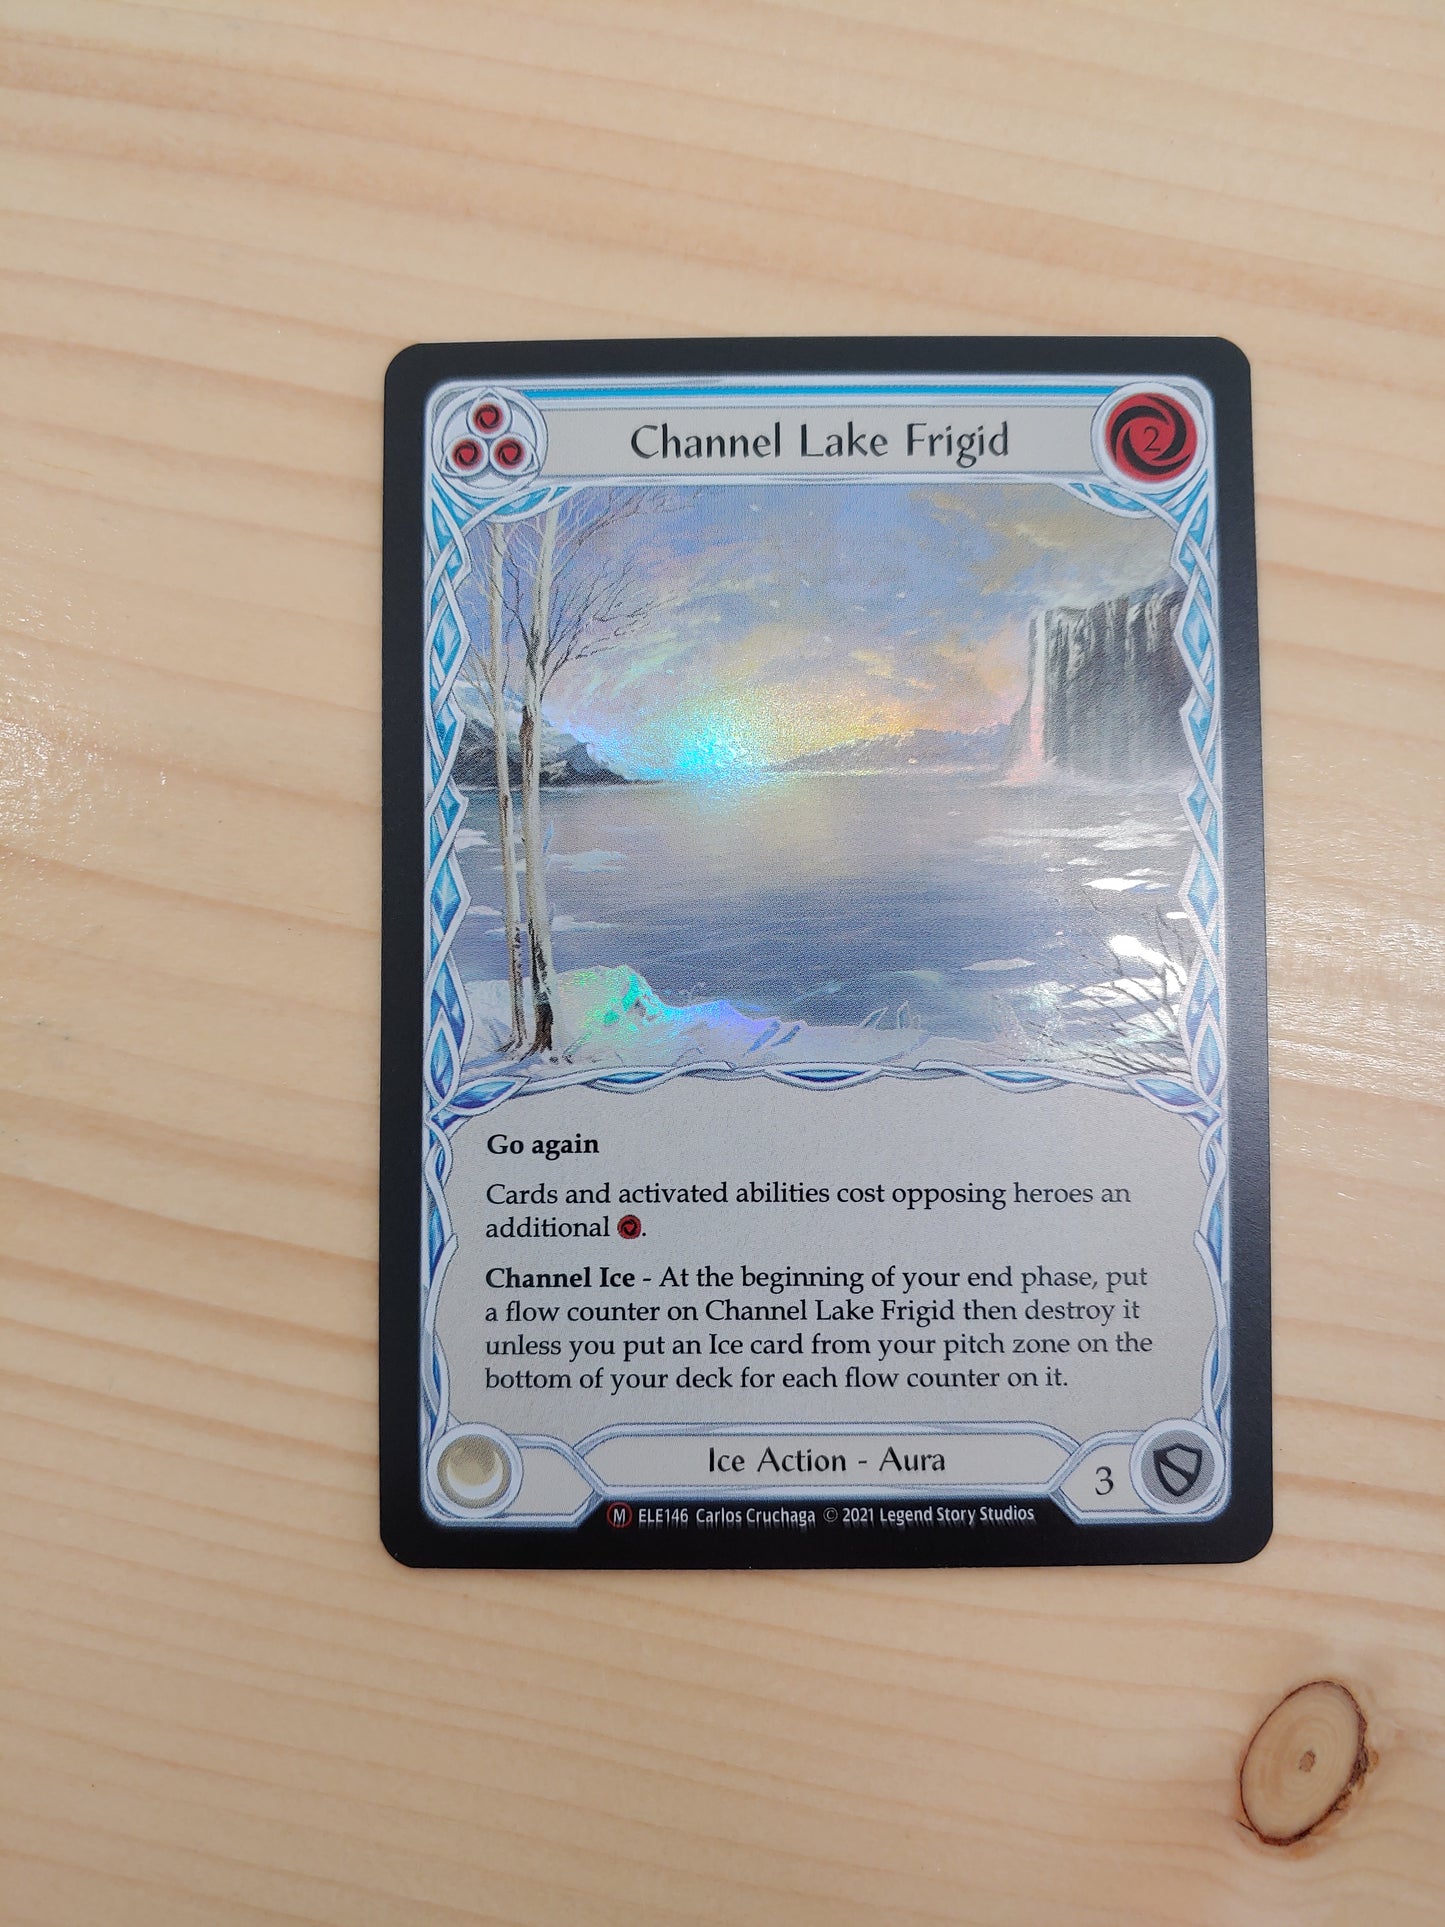 Flesh and Blood - Single card- Channel Lake Frigid- Unlimited Edition Foil NM